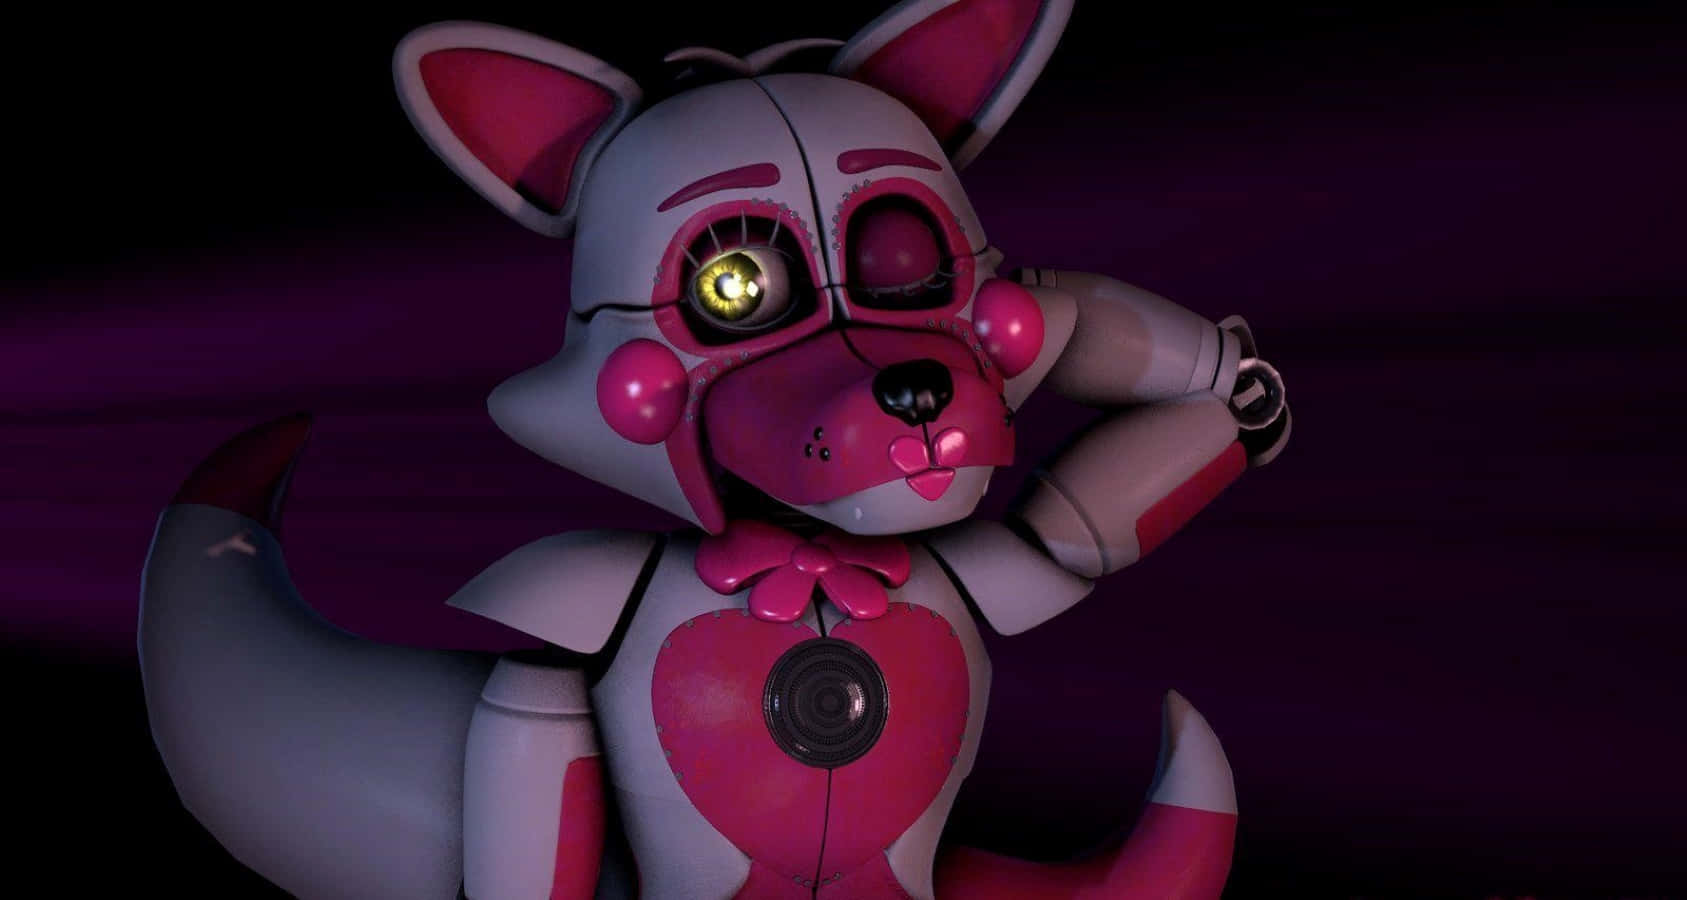 Funtime Foxy - A Vibrant and Exciting Character Wallpaper